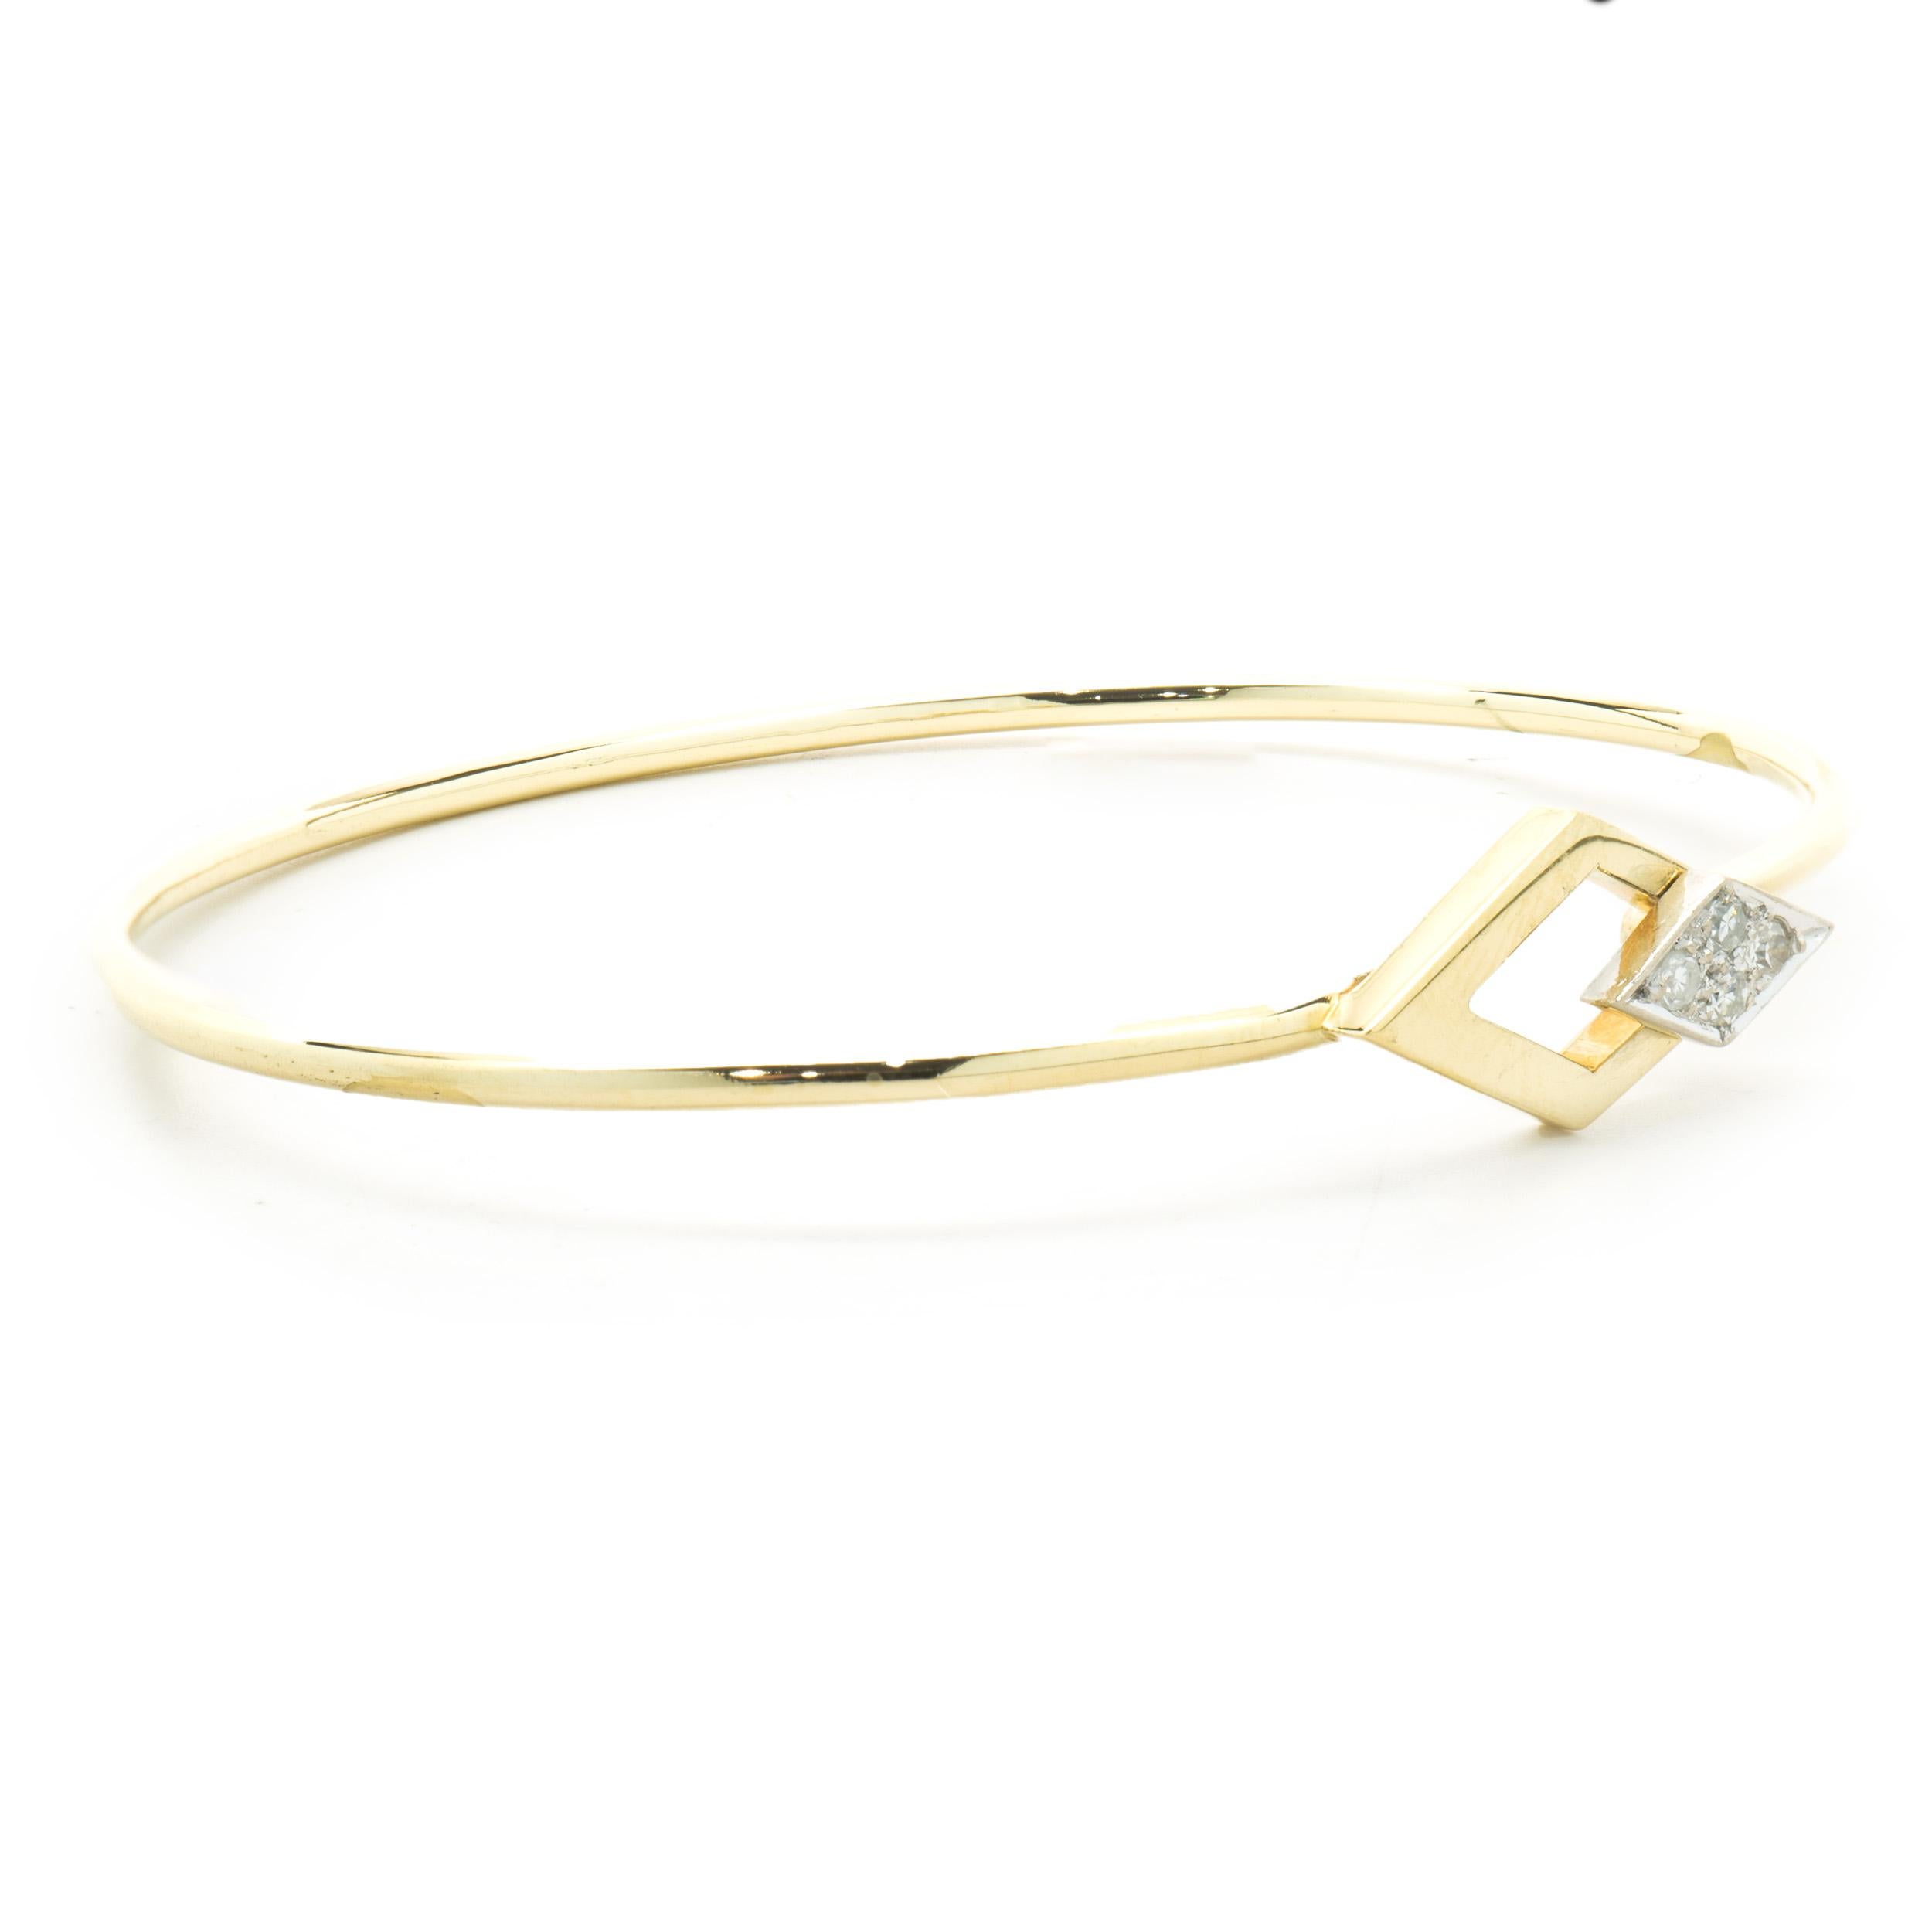 Designer: custom design
Material: 14K yellow gold
Diamond: 4 round single cut = 0.12cttw
Color: H
Clarity: SI1-2
Dimensions: bracelet will fit up to a 6.5-inch wrist
Weight: 7.22 grams